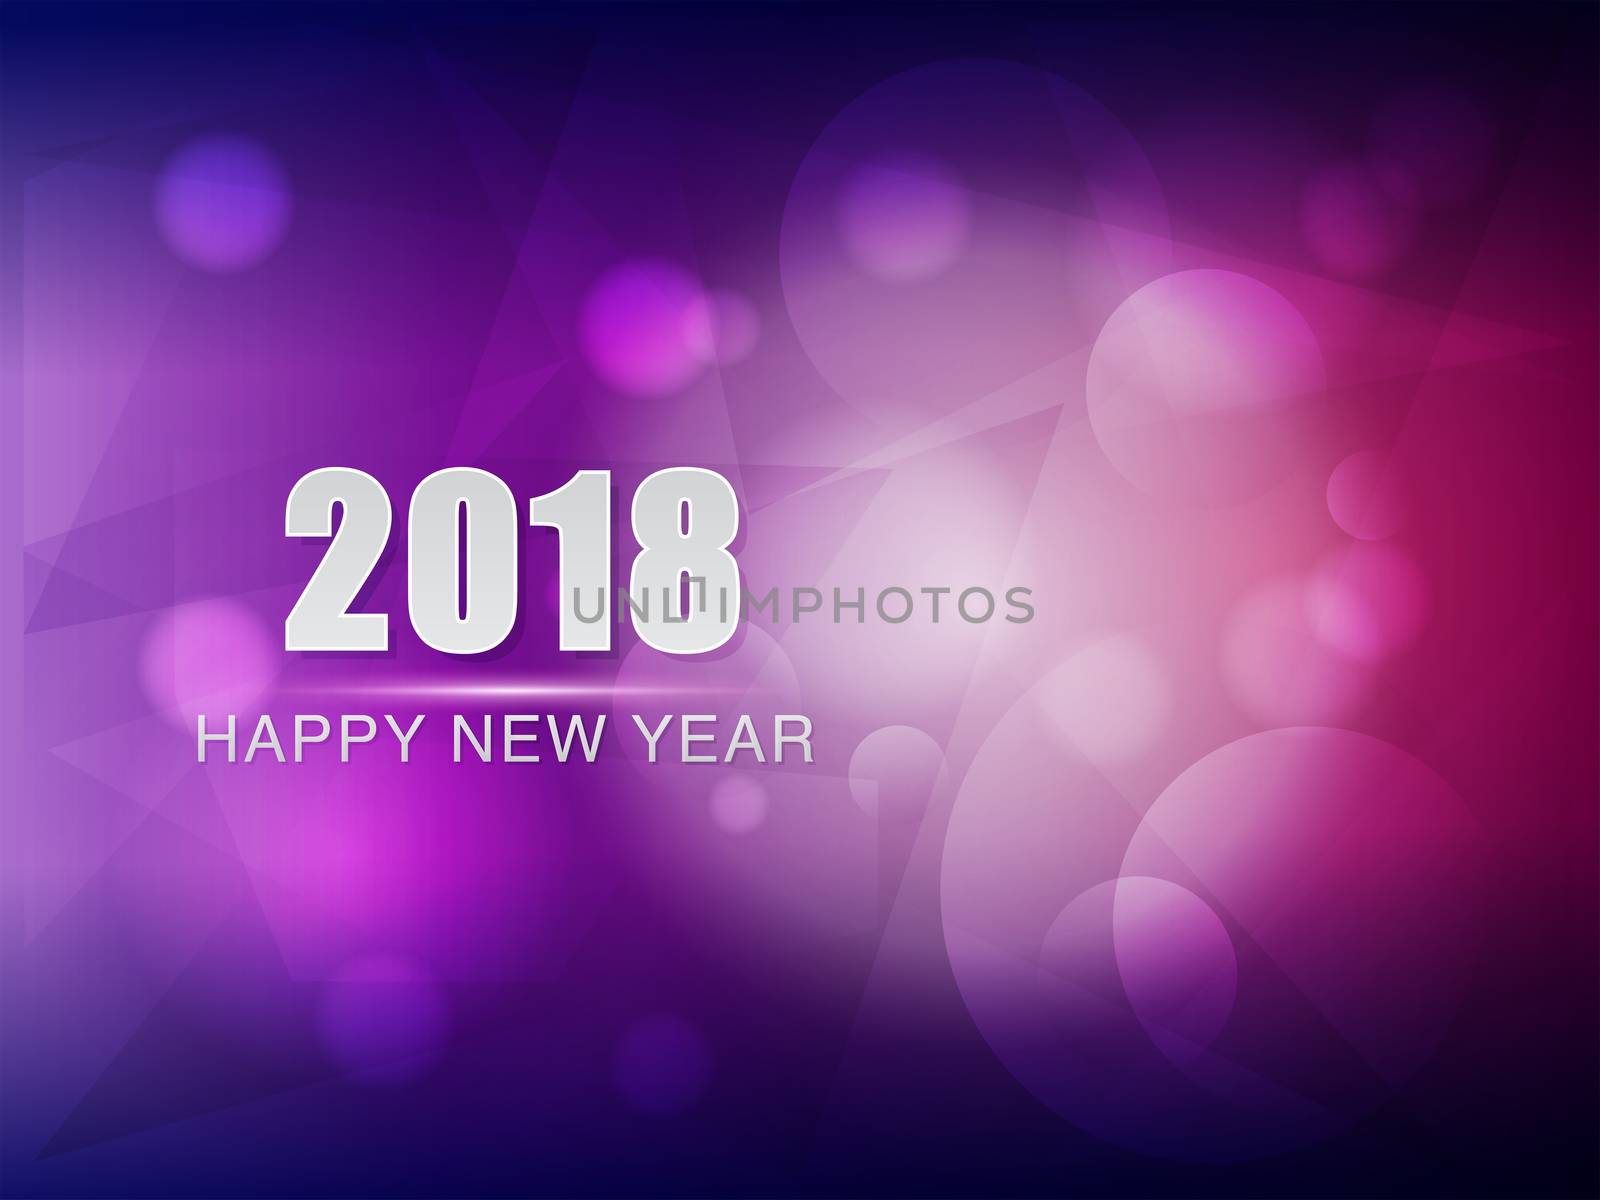 happy new year 2018, violet purple greeting card, holiday seasonal concept